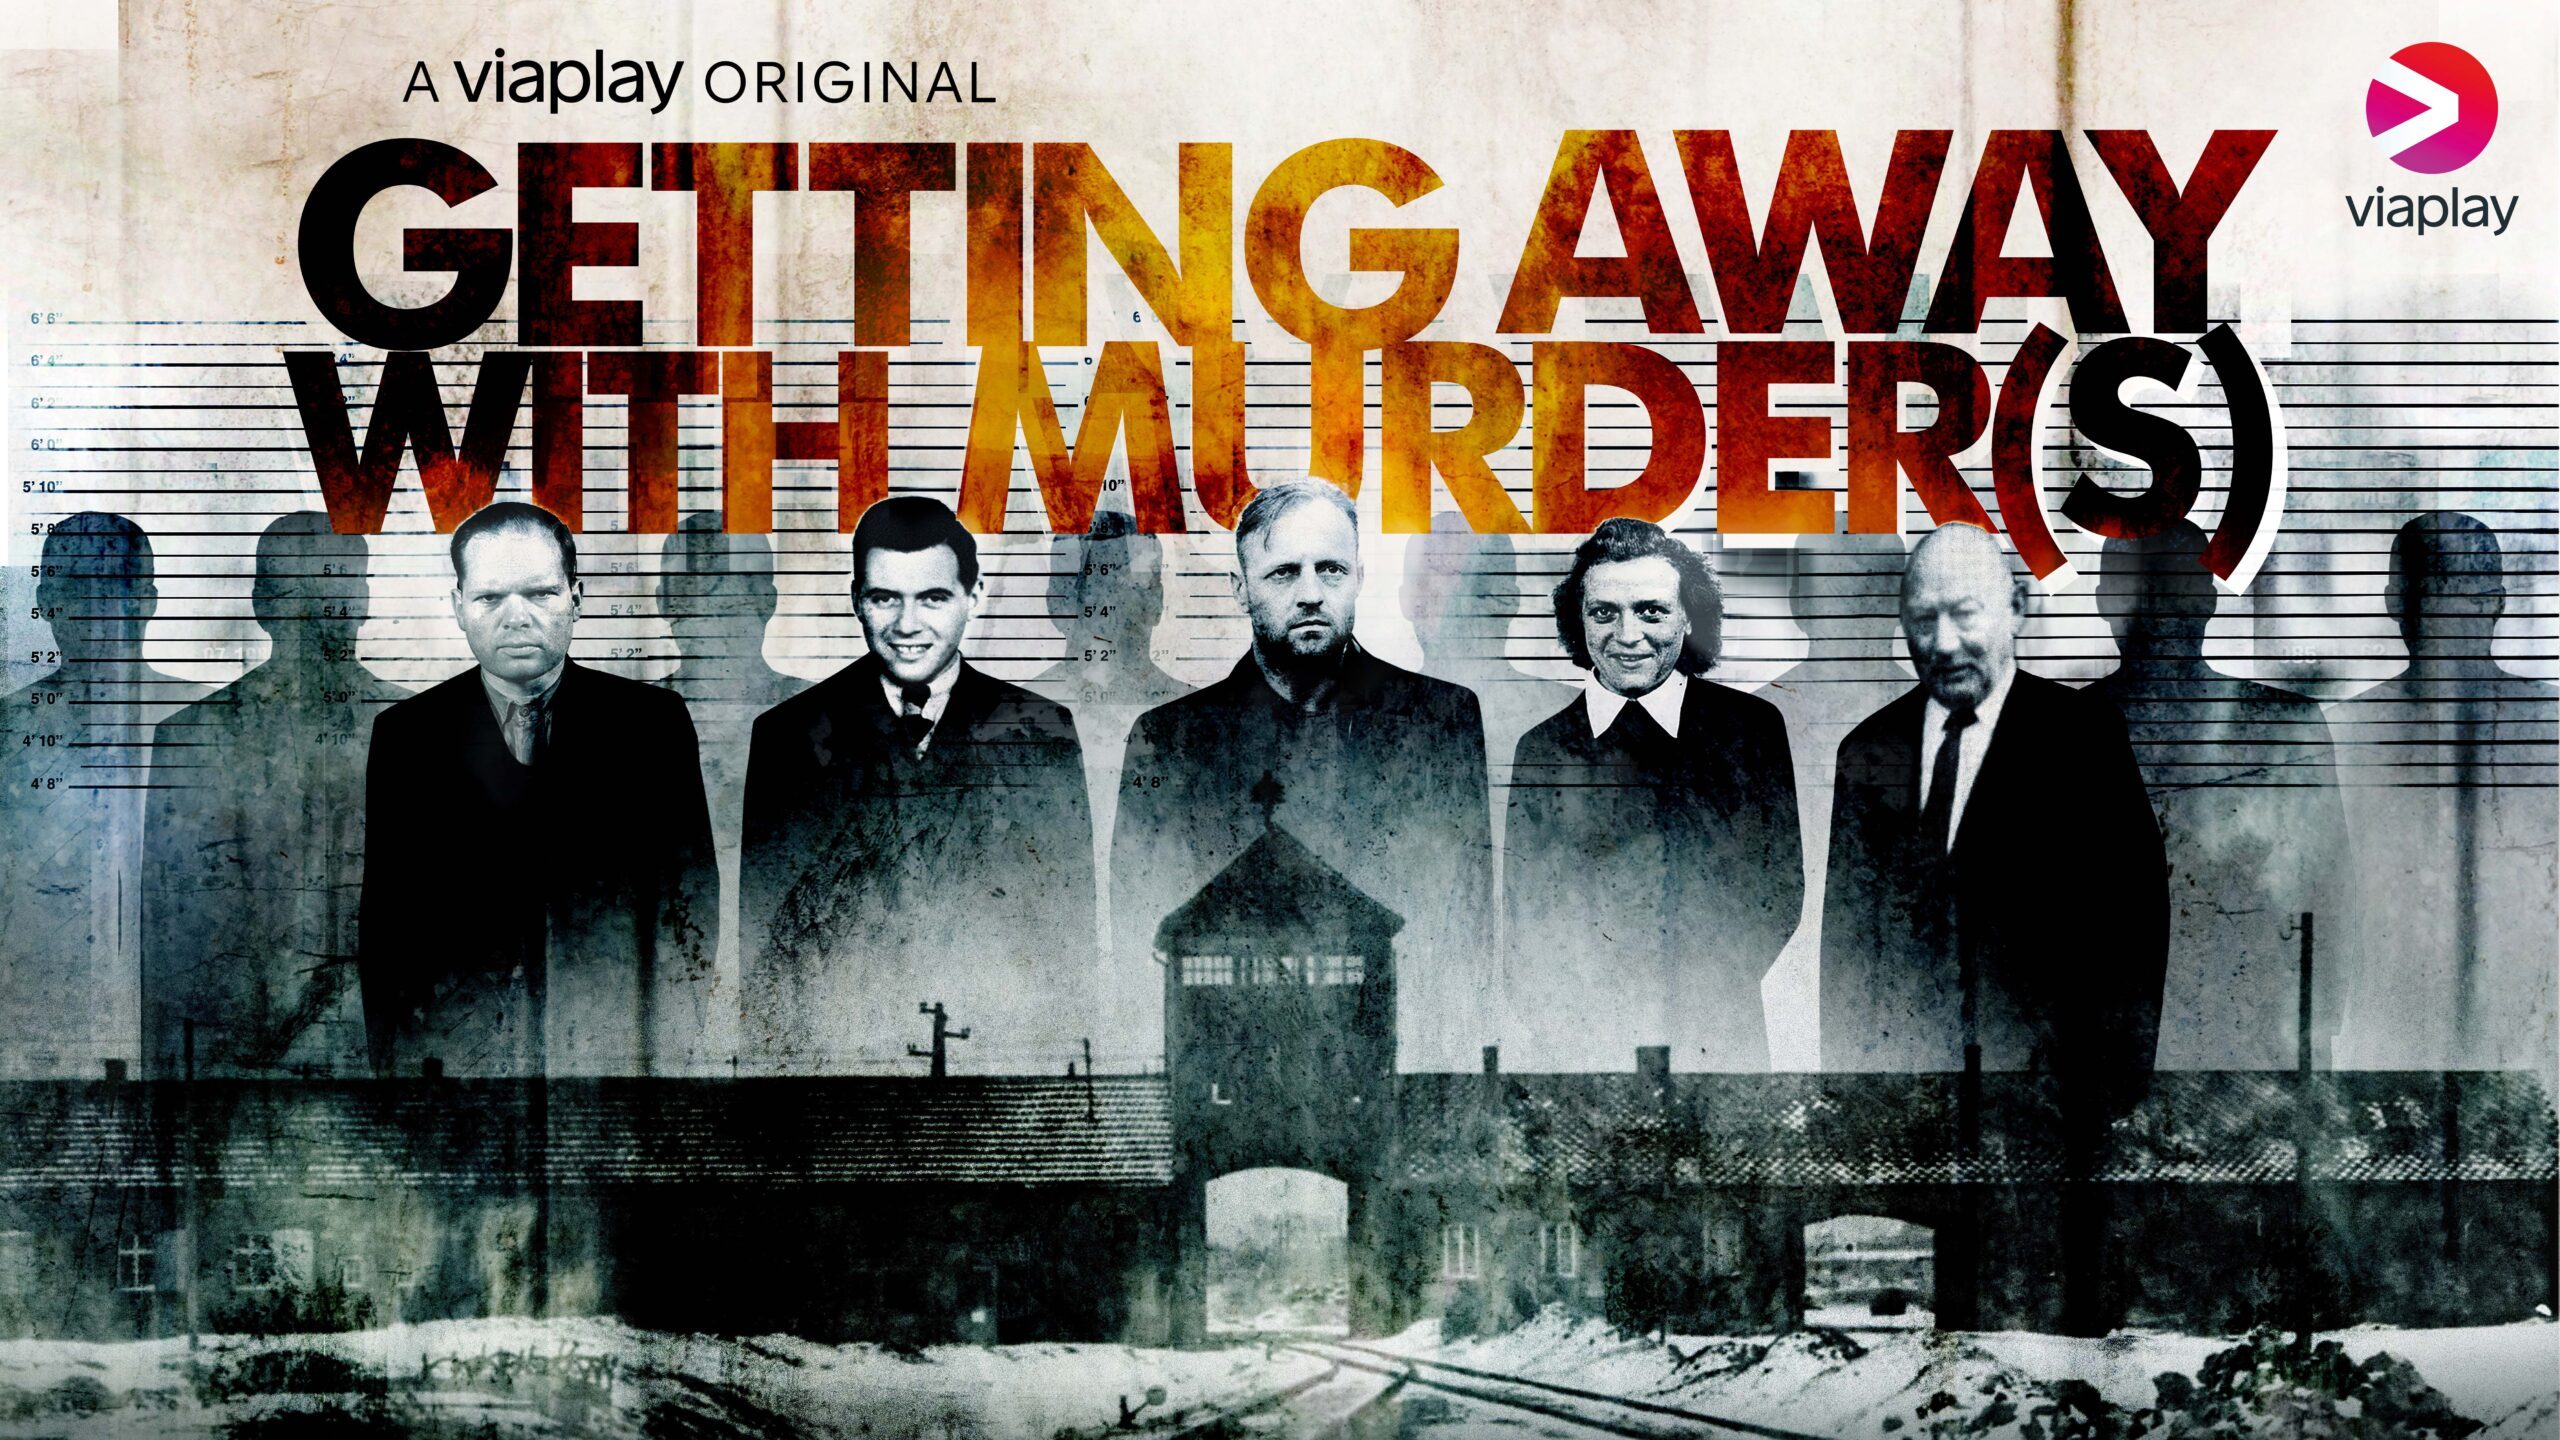 Getting Away with Murder(s) Viaplay